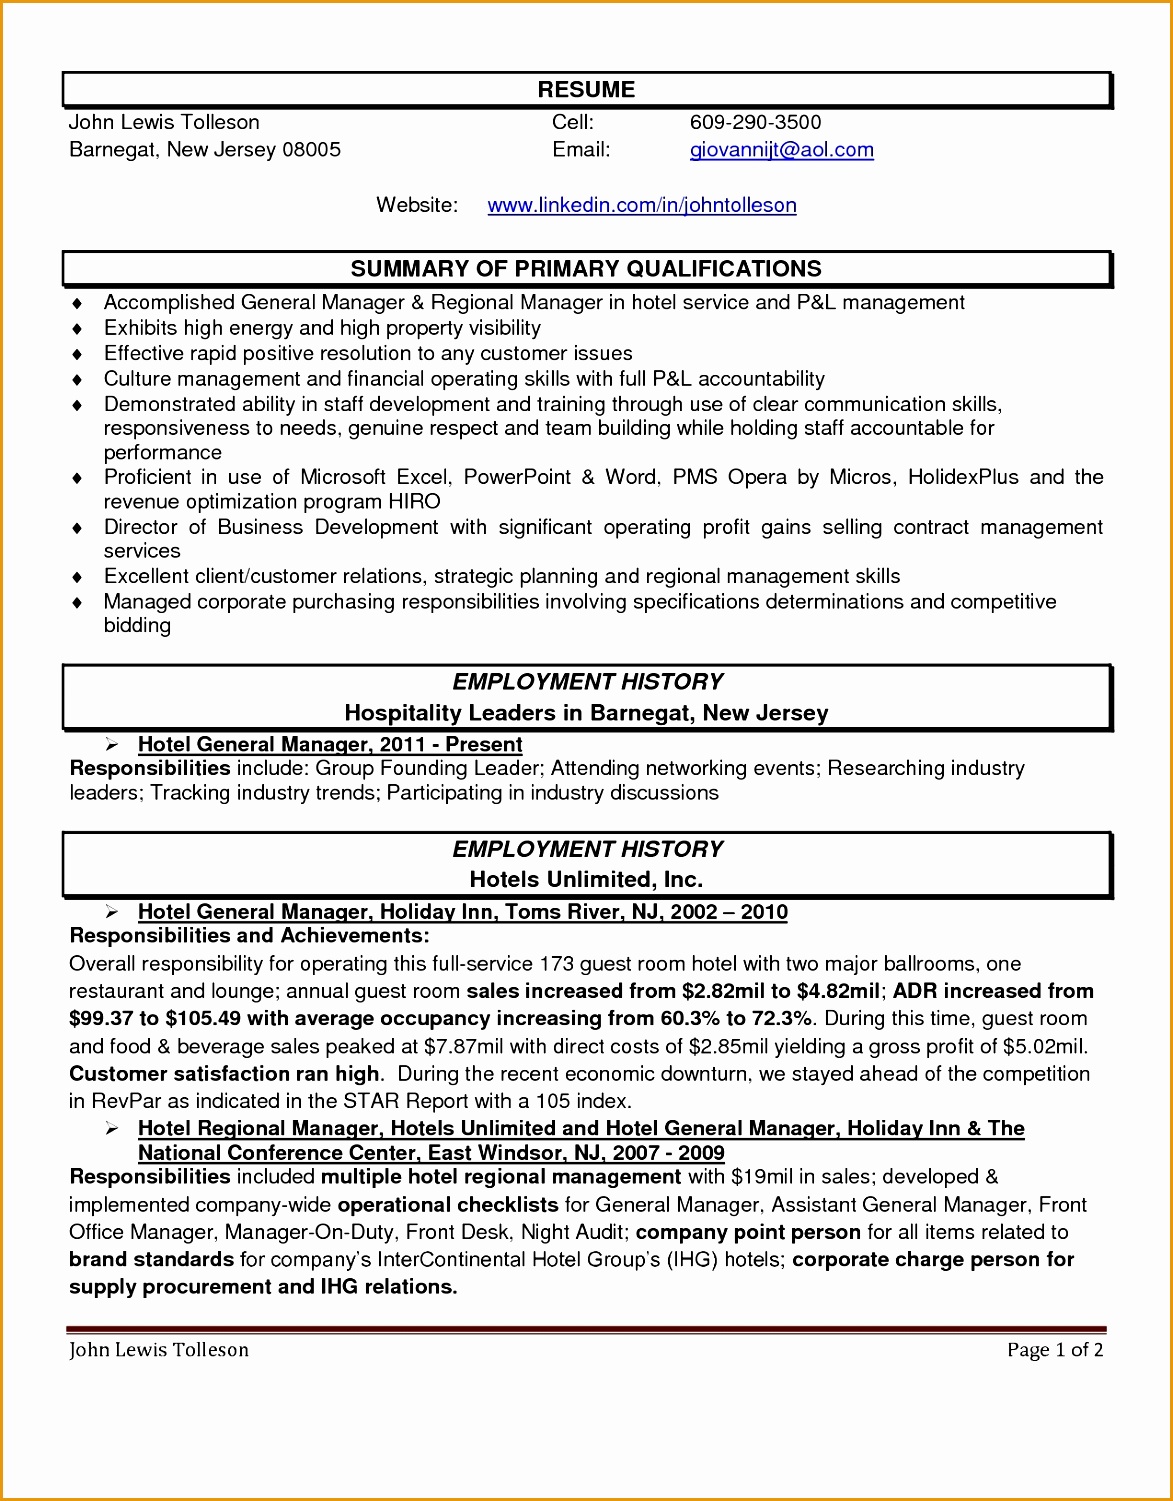 hotel general manager resume template15011173